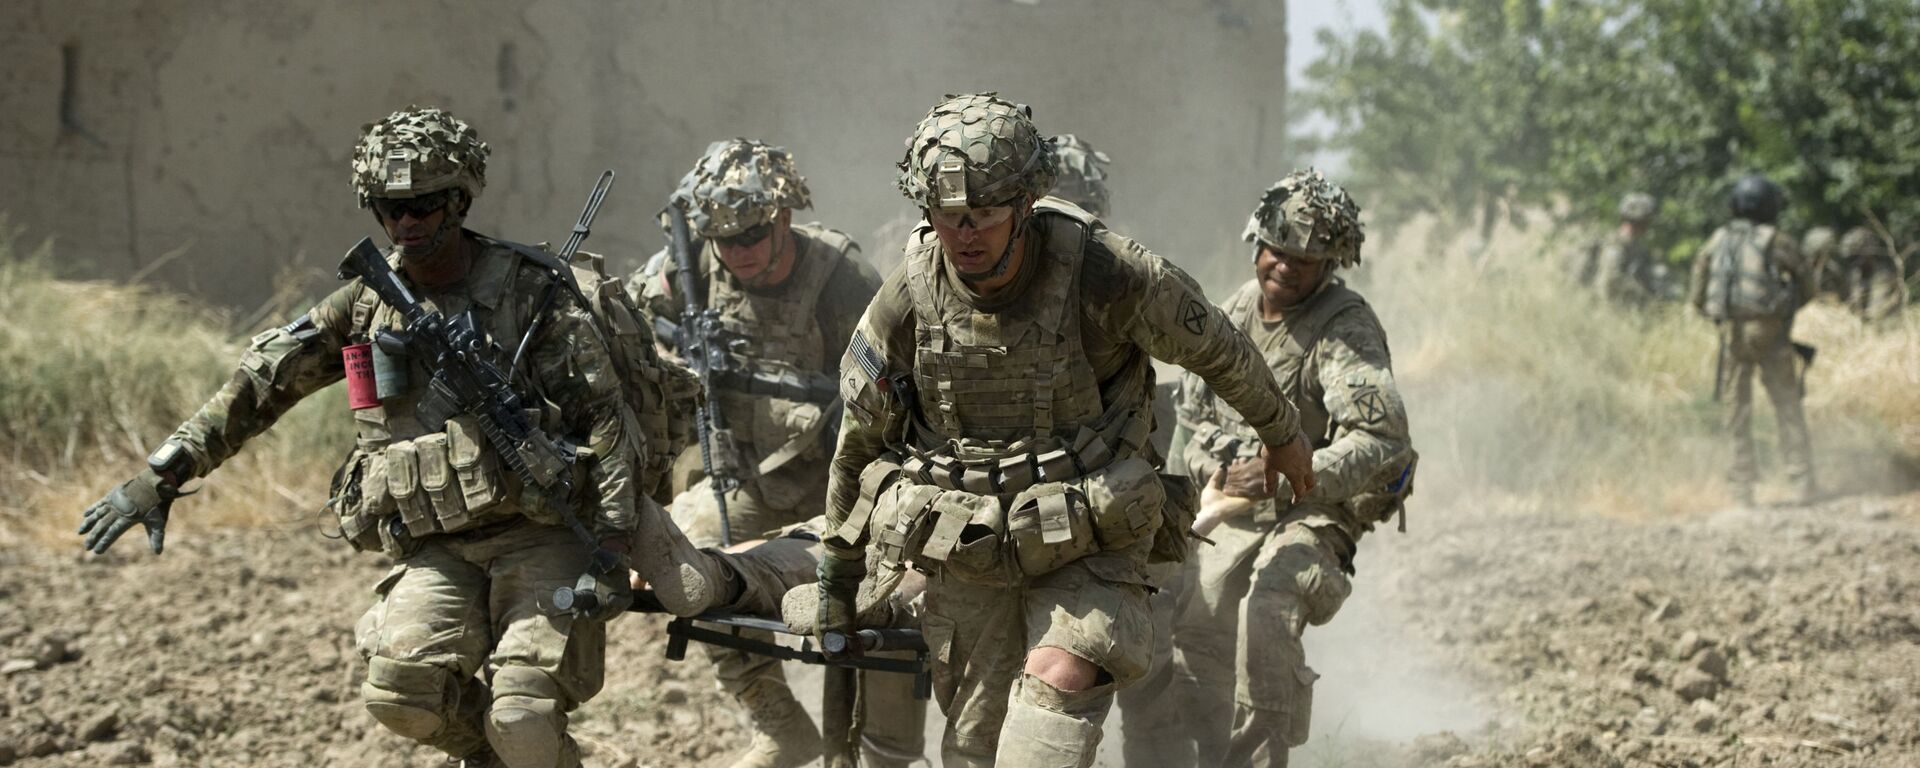 A fatally wounded US soldier is carried by comrades during fighting in Afghanistan in August 2011.  - اسپوتنیک افغانستان  , 1920, 27.02.2023